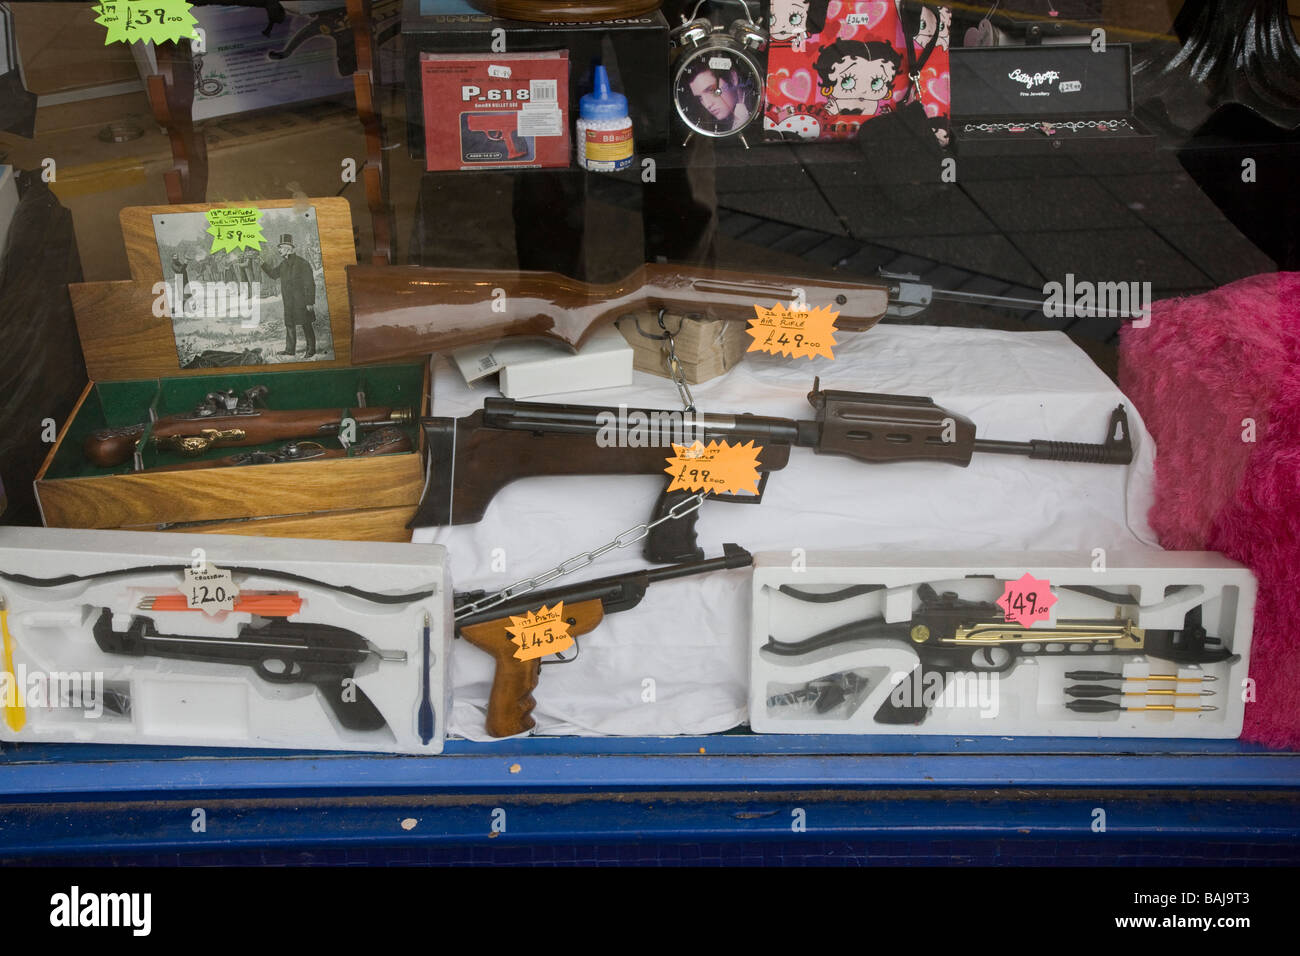 Air guns crossbows and other dangerous weapons for sale in a gun shop window Stock Photo